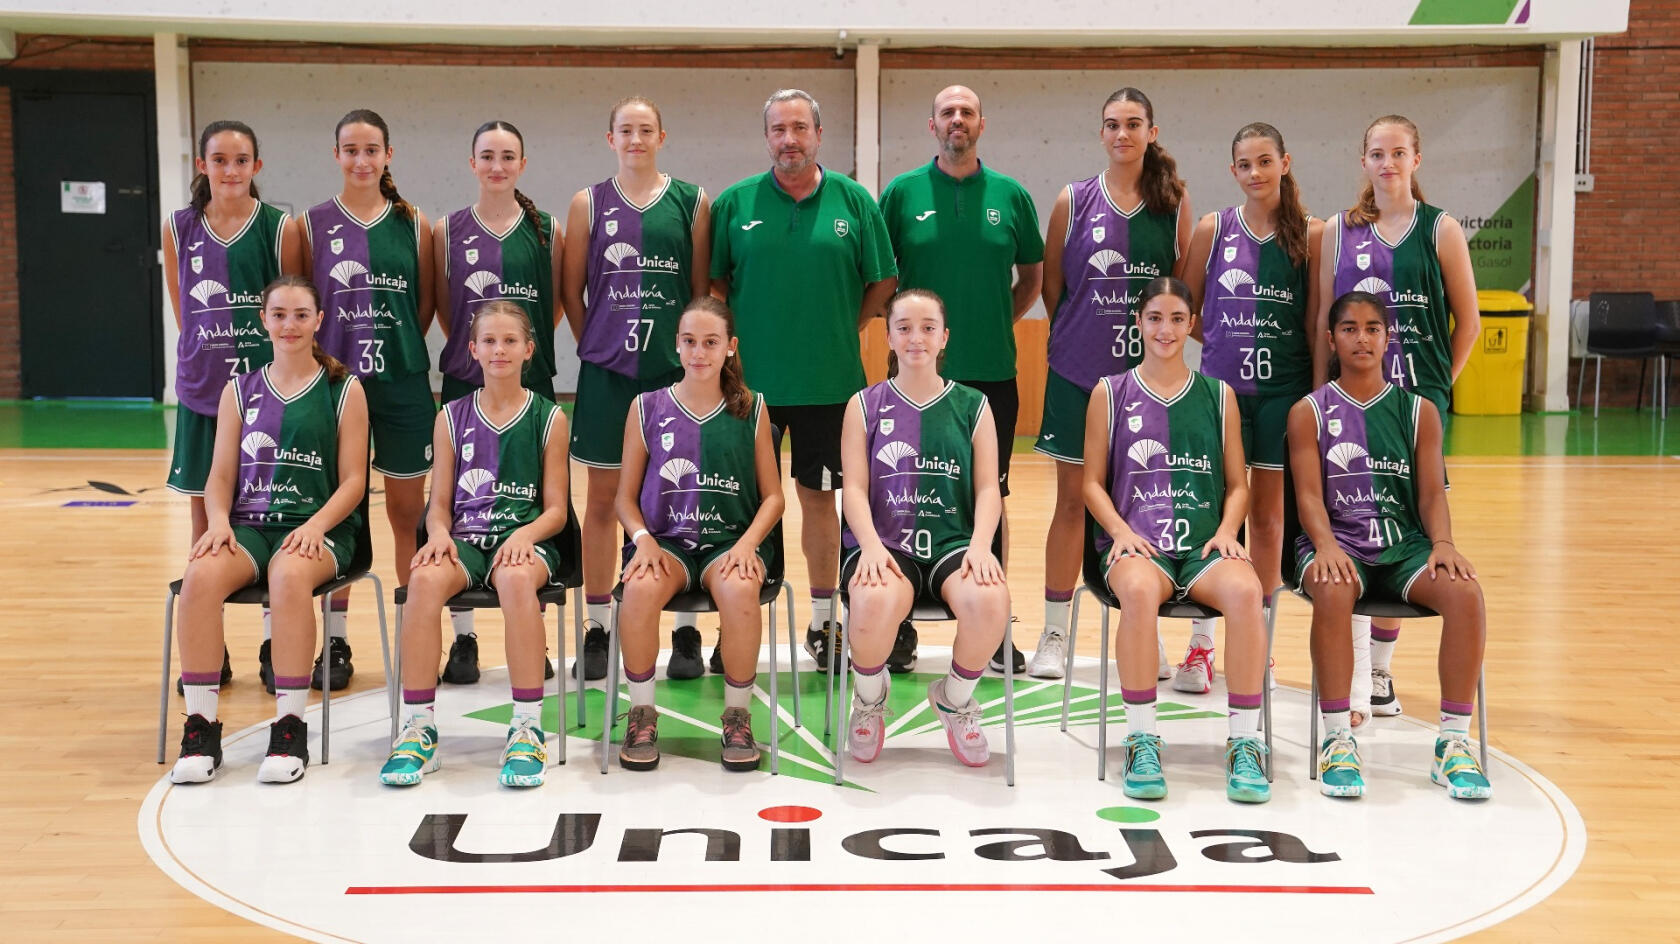 Turn of the Andalusian Championship for U14 Unicaja Andalucía female team